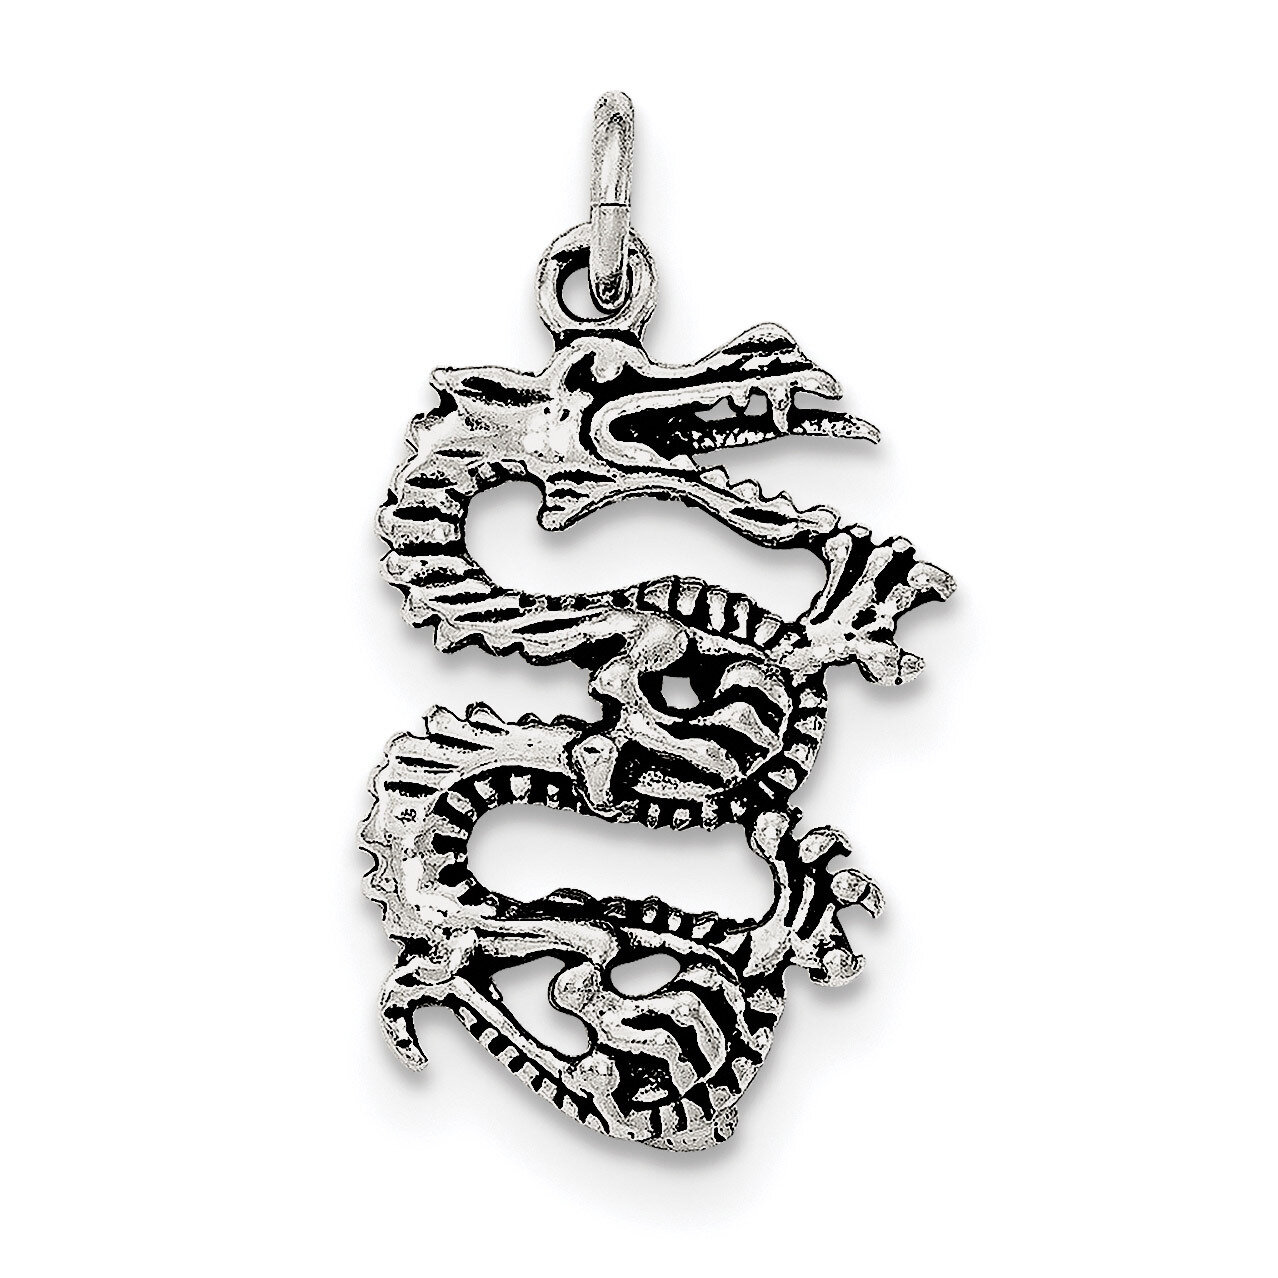 Dragon Pendant Sterling Silver Antiqued & Textured QC8967